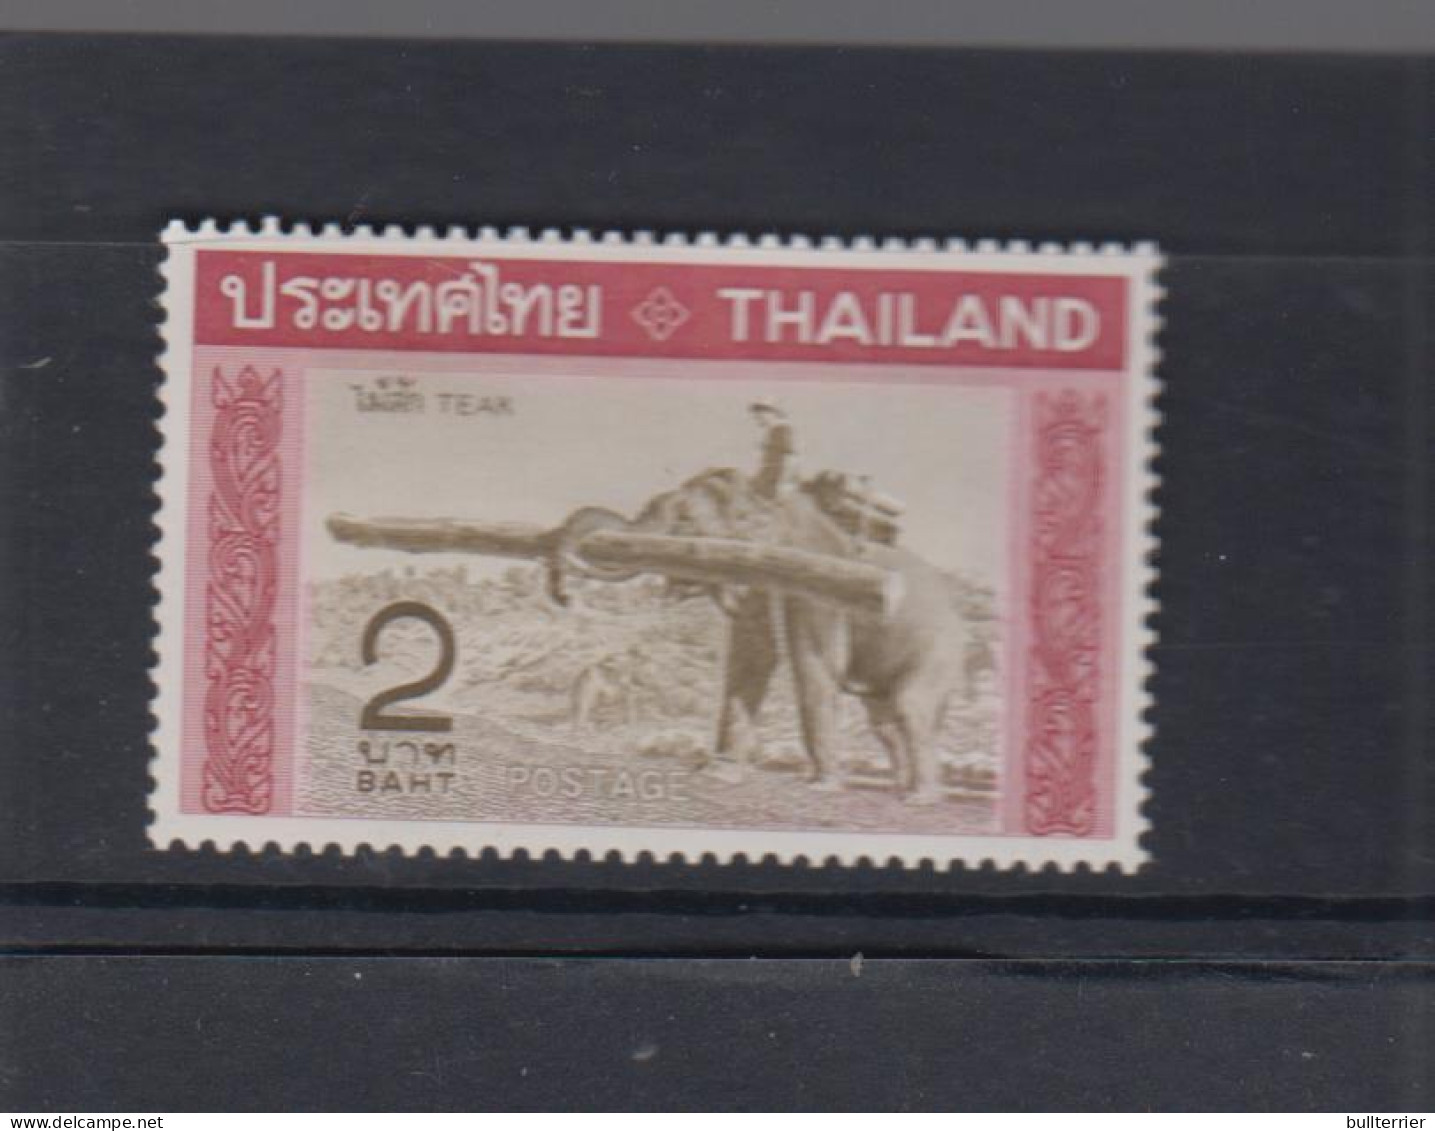 THAILAND - 1968 - ELEPHANT CARRYING TEAK LOG MINT HINGED PREVIOUSLY- VERY FINE SG Cat 2012 =£10.50 - Thailand